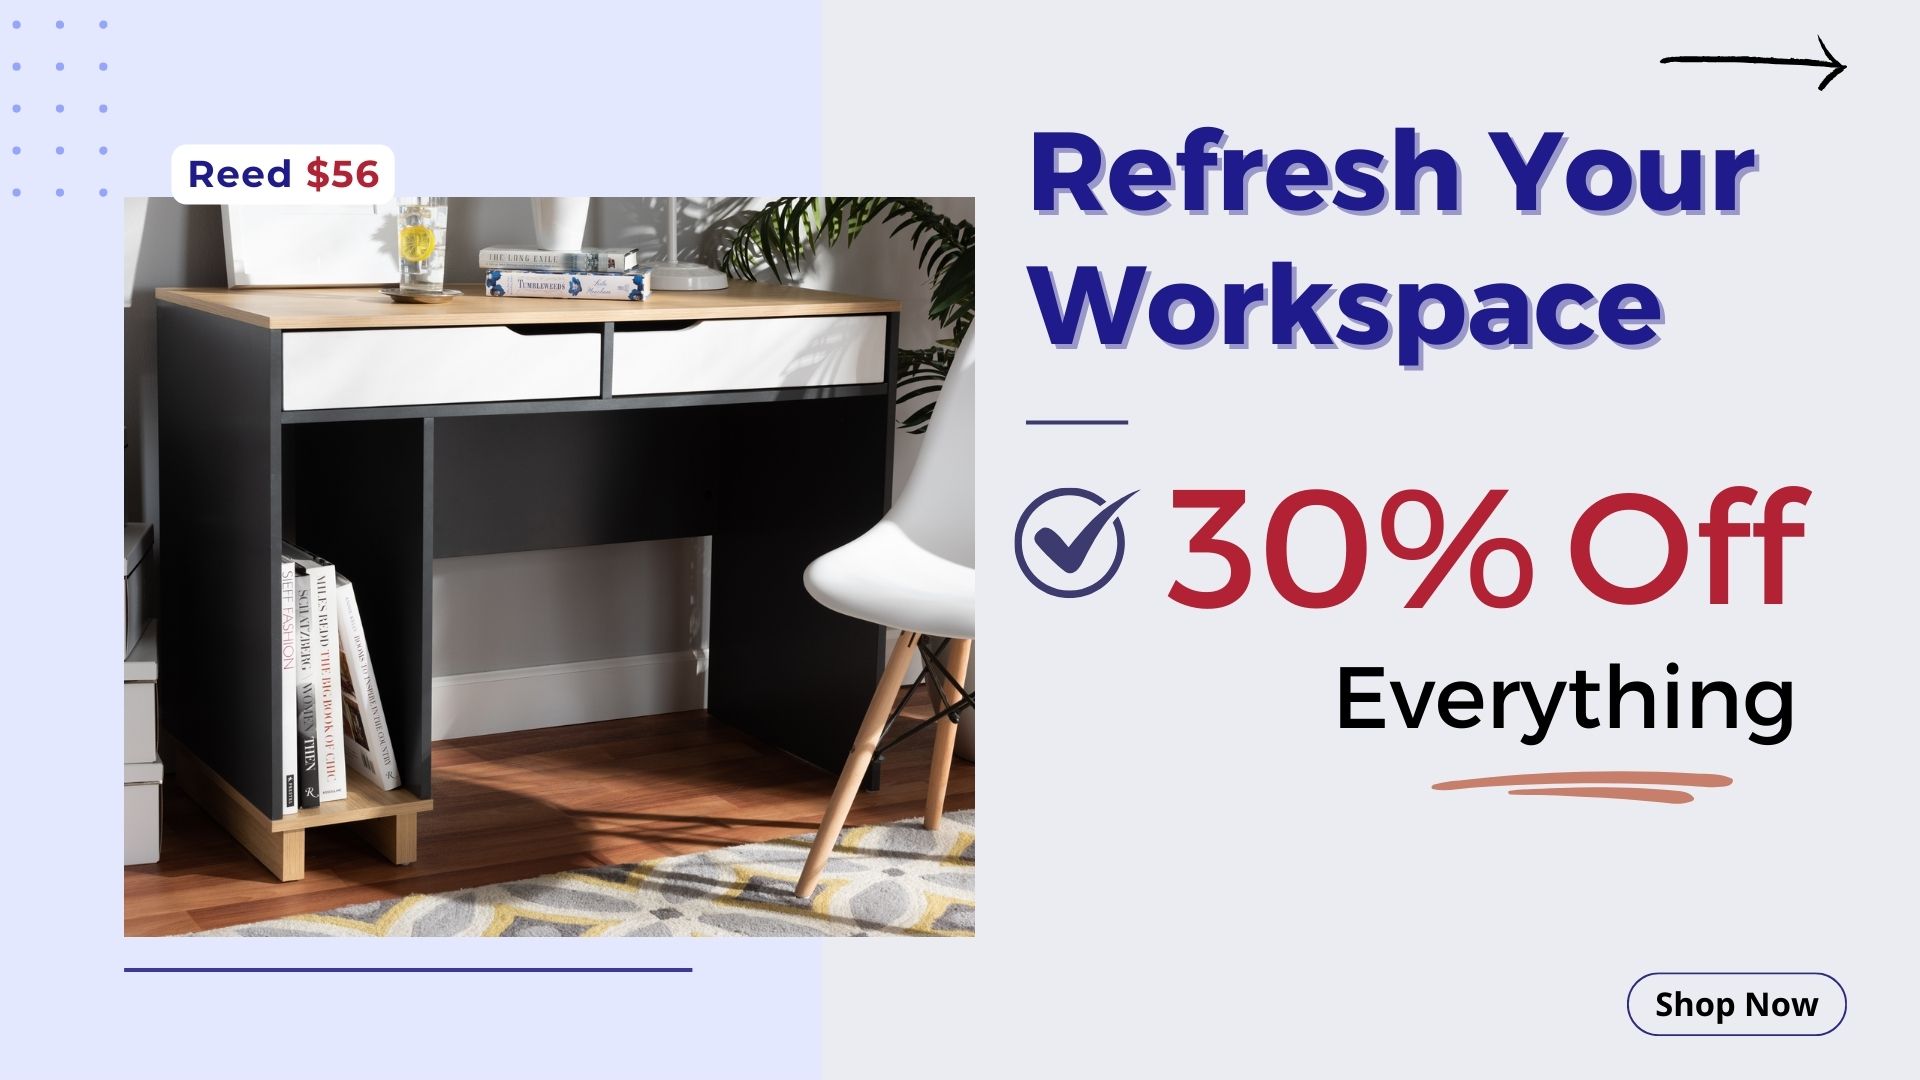 Reed $56 Refresh Your Workspace 30% Off Everything